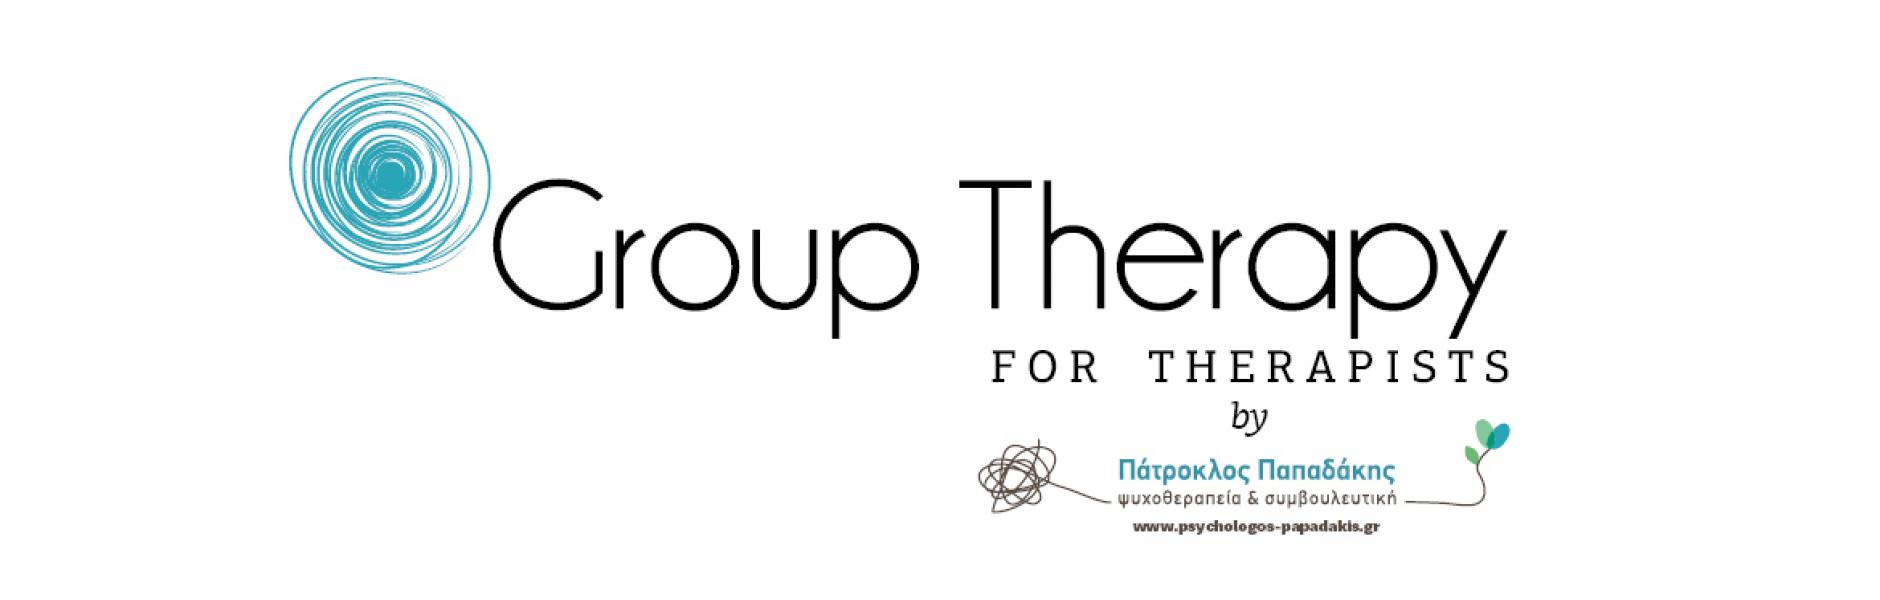 Group Therapy for Therapists